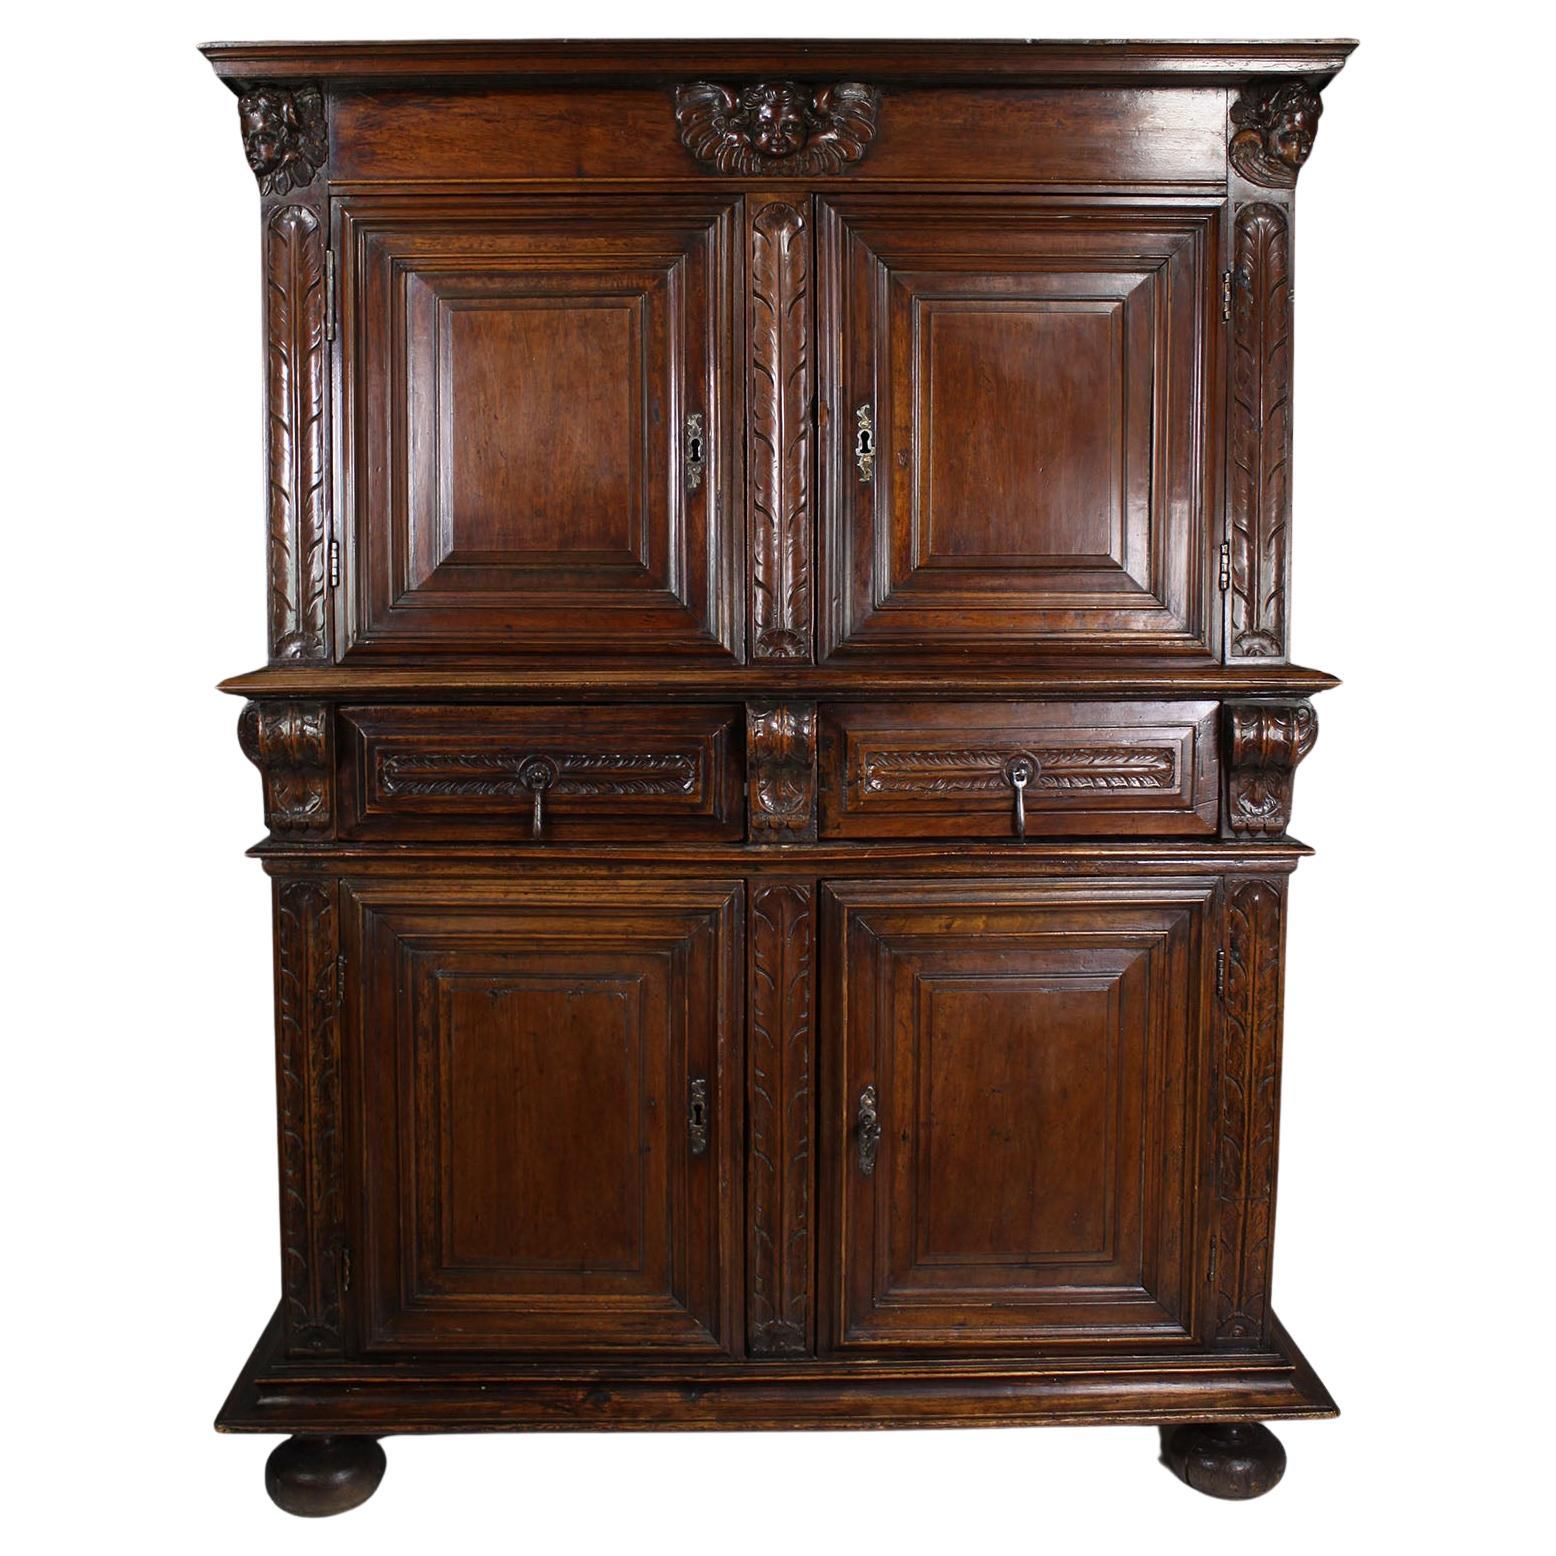 A 17th-18th Century French/Italian Renaissance Walnut Carved Credenza Cabinet For Sale